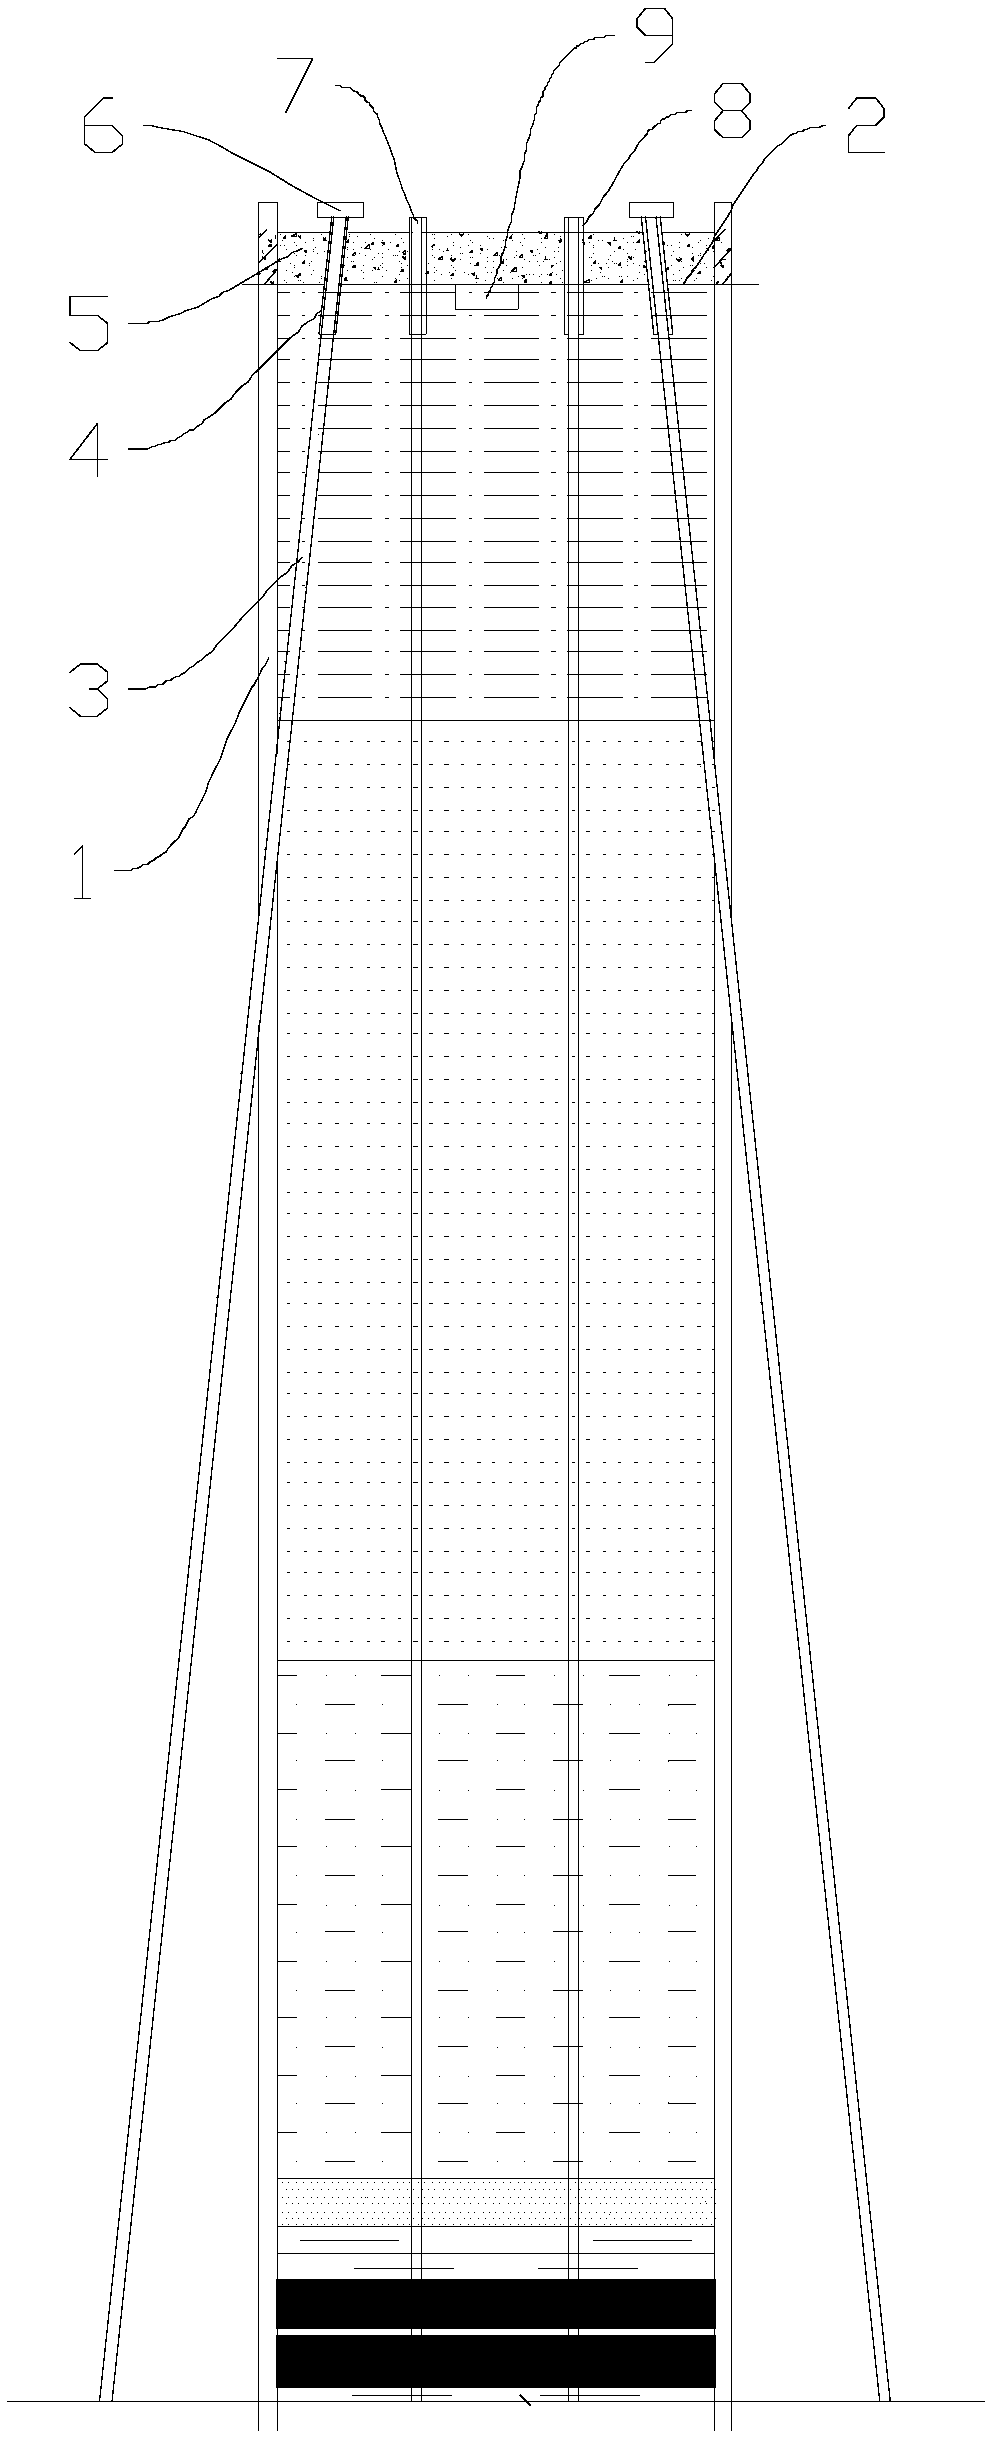 Grouting and water blocking method for large inclined angle vertical fracture formation